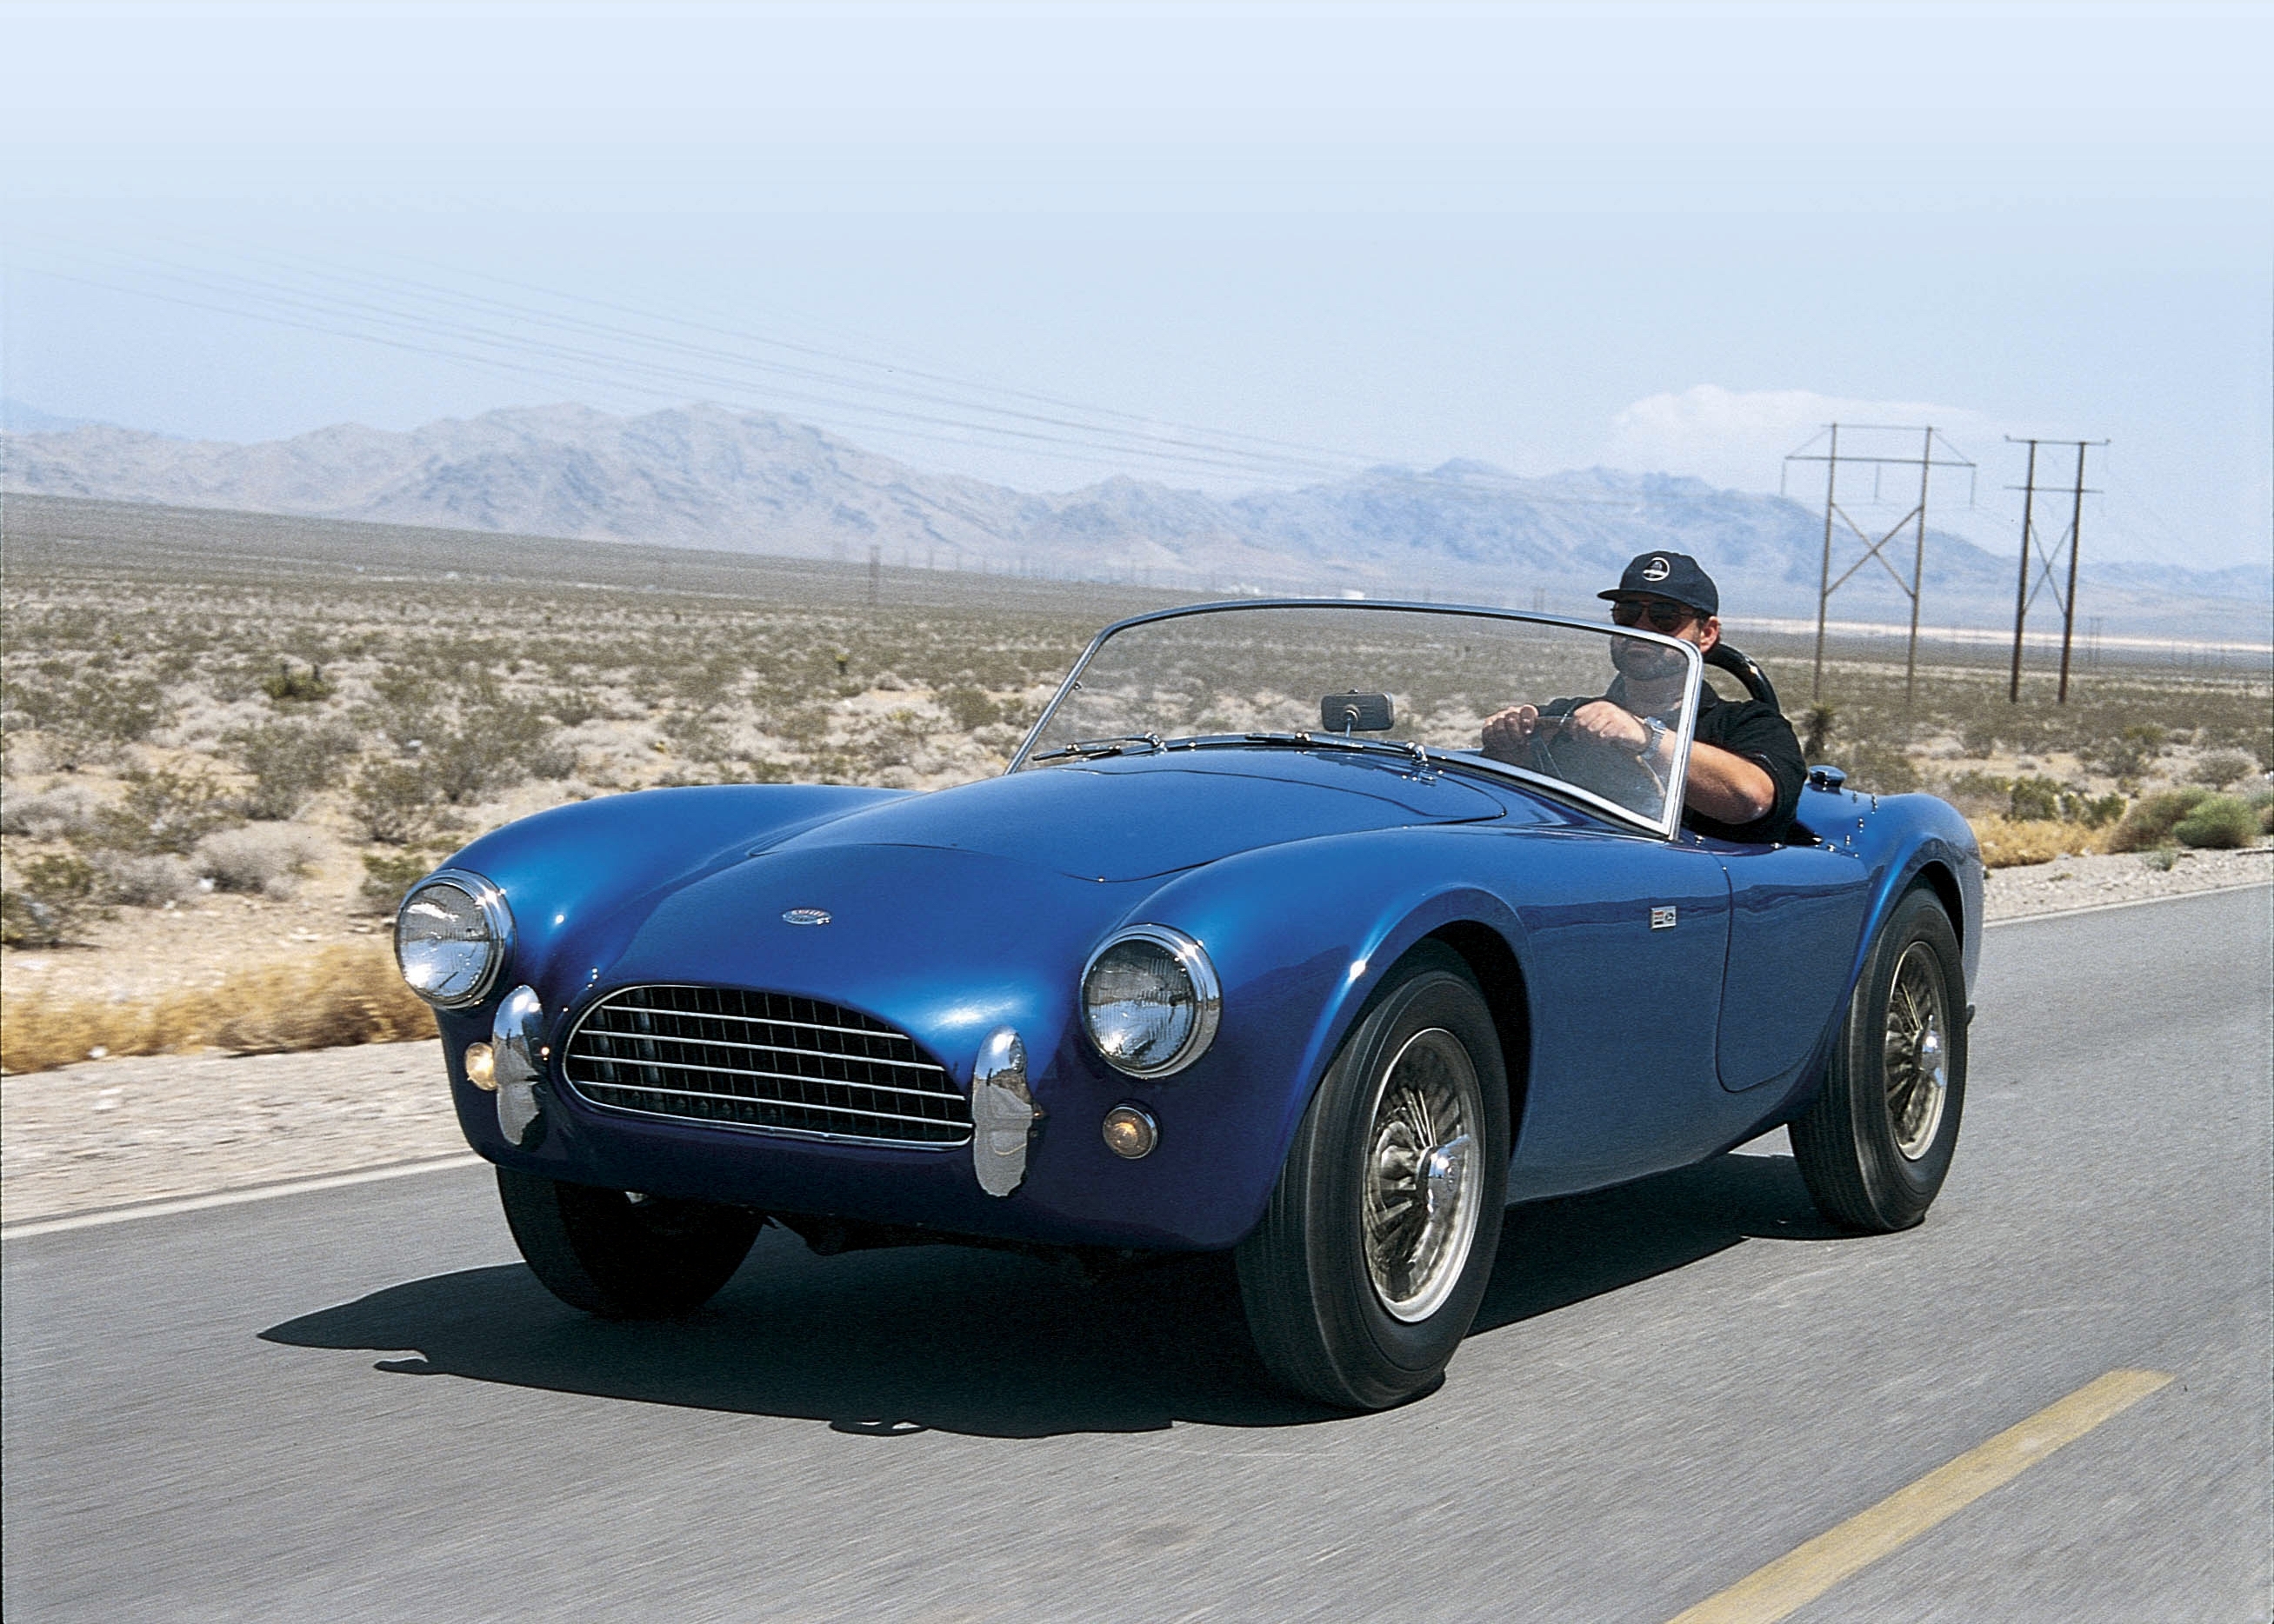 Driven: CSX2000 — At the Wheel of the First Shelby Cobra